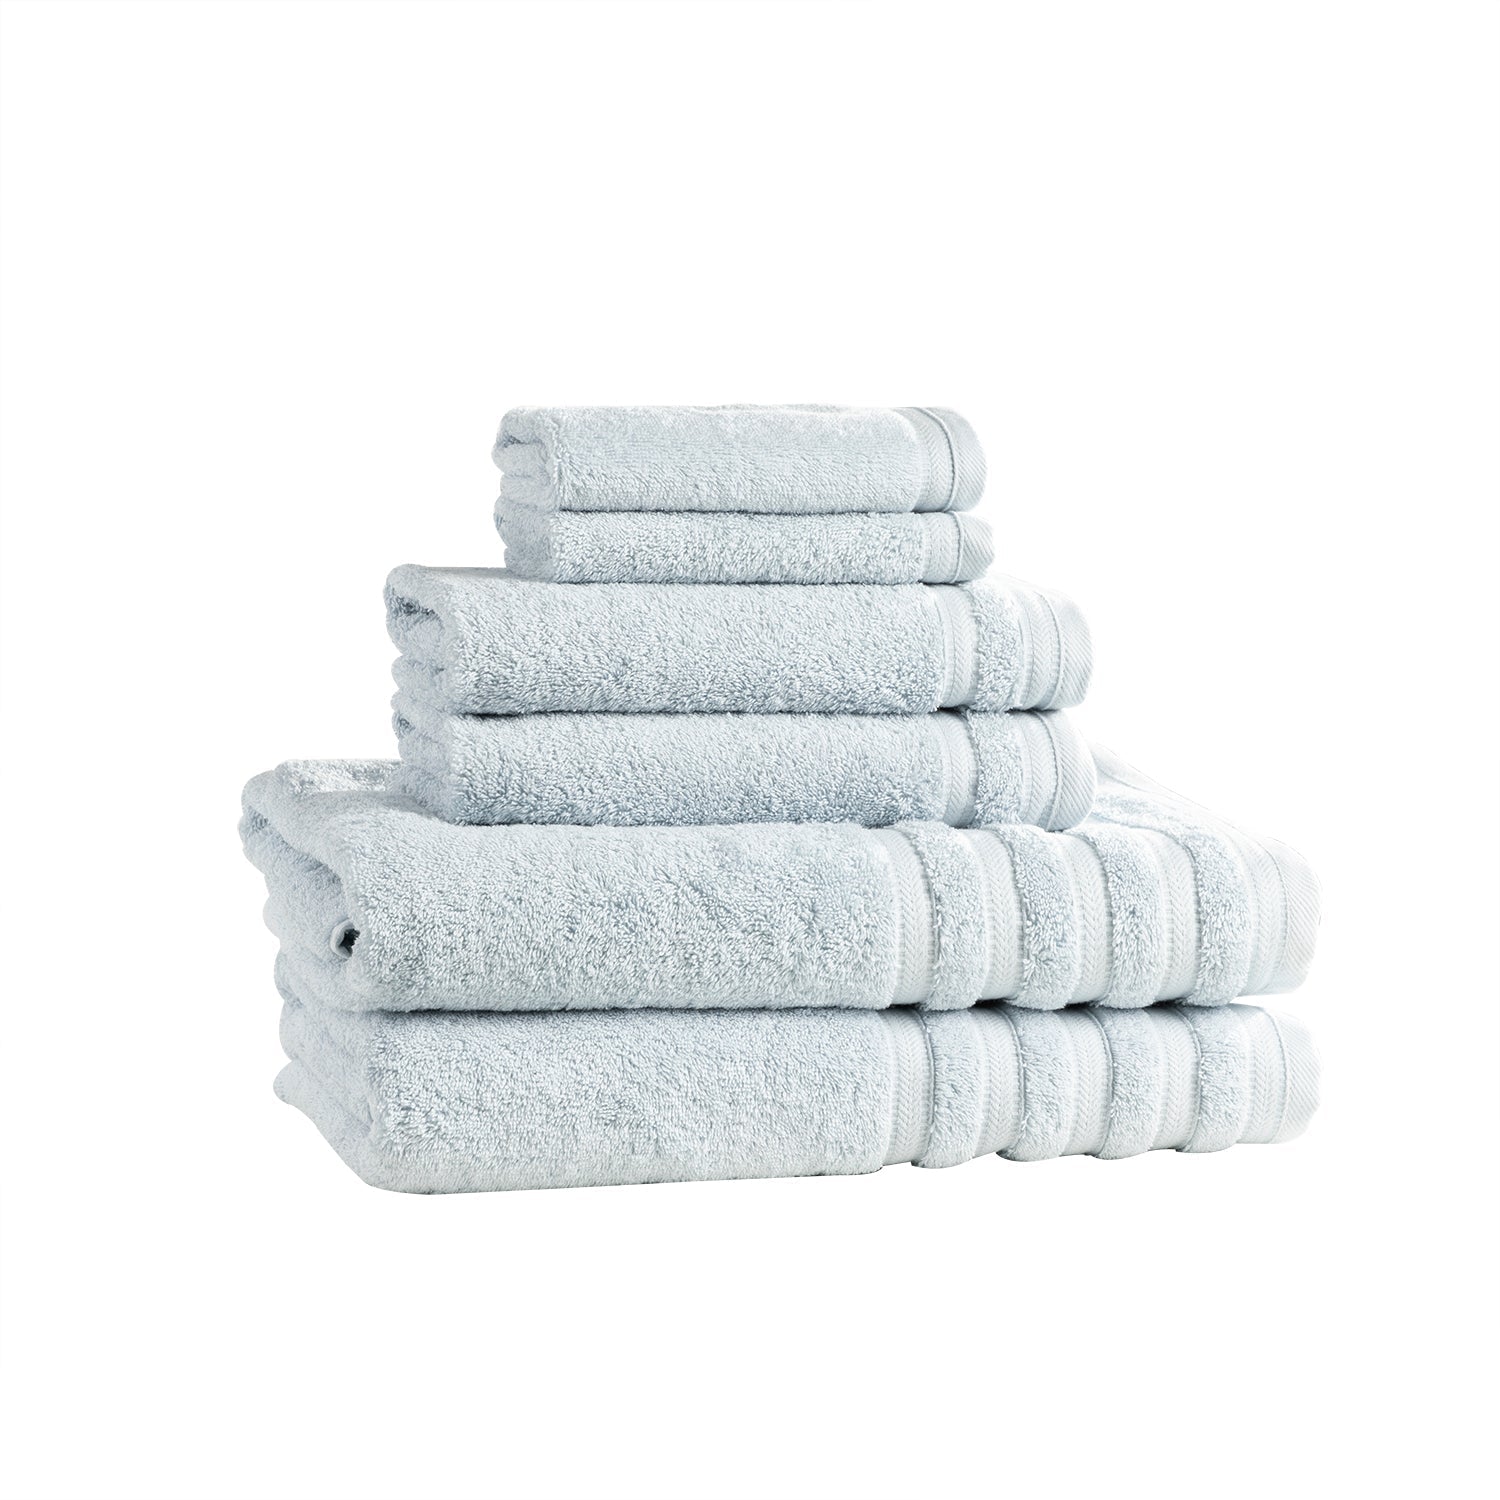 Towels 100% Cotton 30 Piece Towelling Fabric 100 Towell Hotel Sets